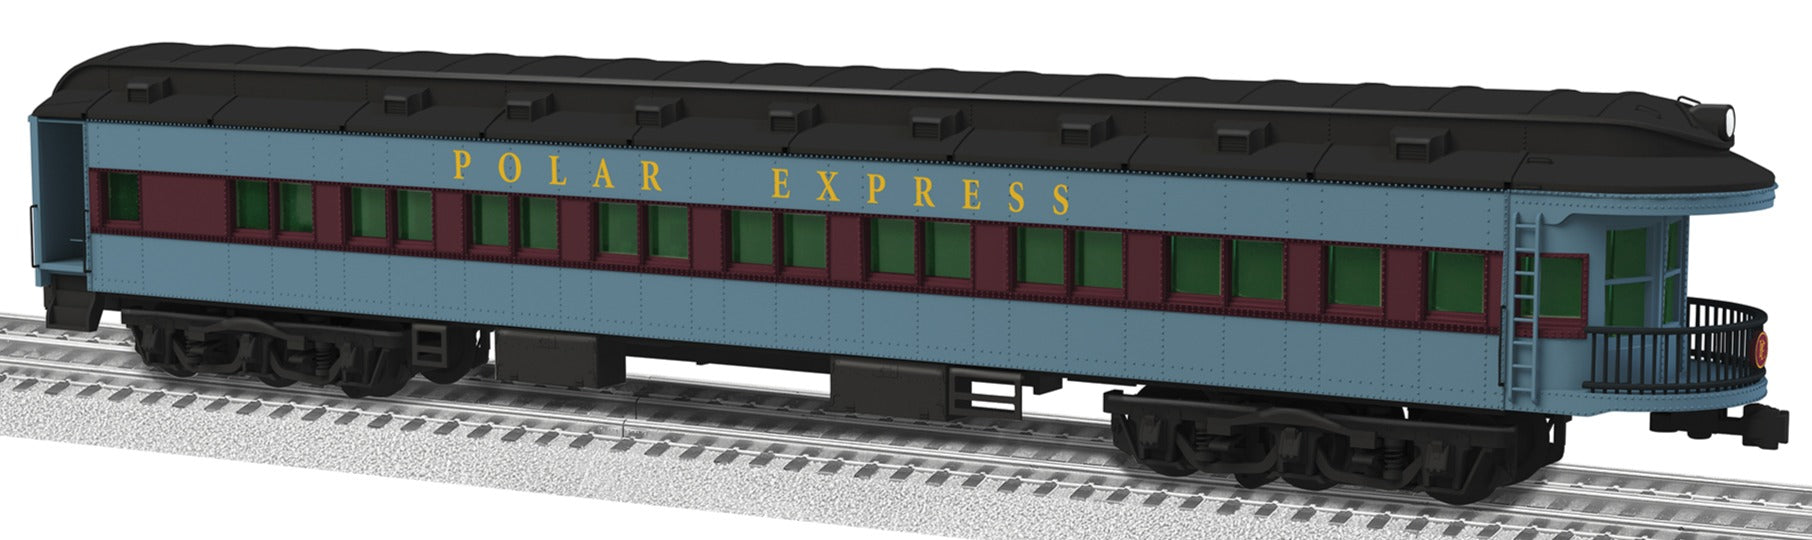 Lionel 2427310 - 20th Anniversary 18" Observation Car "The Polar Express" w/ Round End (Black Roof)